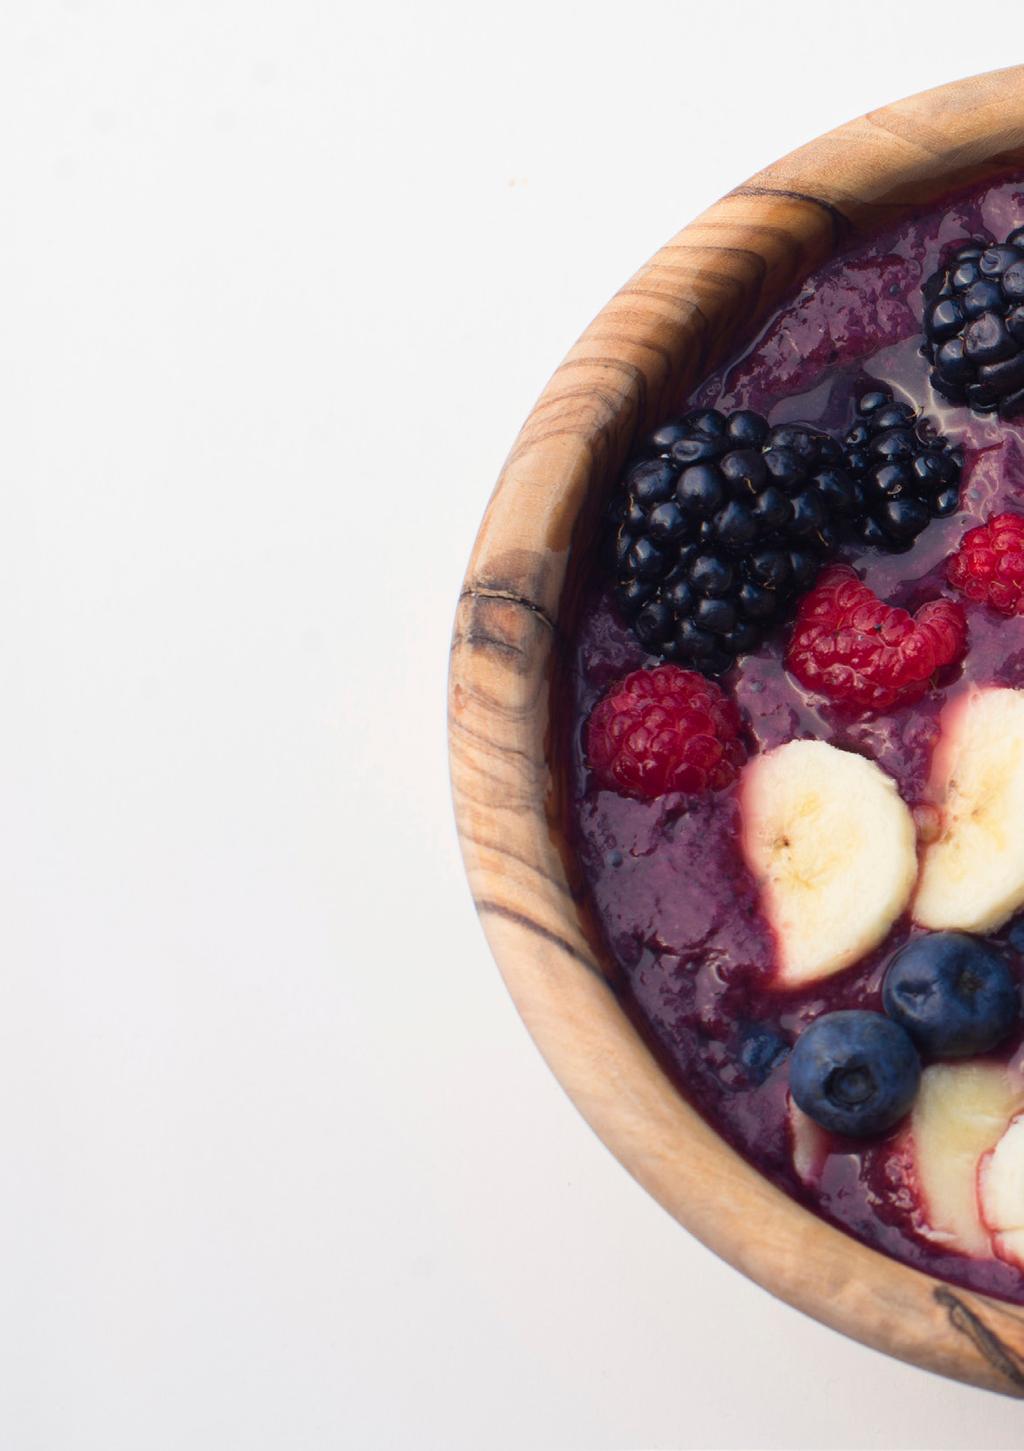 Superfood Fruit Bowl Our Organic Blueberry and Blackcurrant powders are sweet and delicious and also high in antioxidants and anthocyanins.